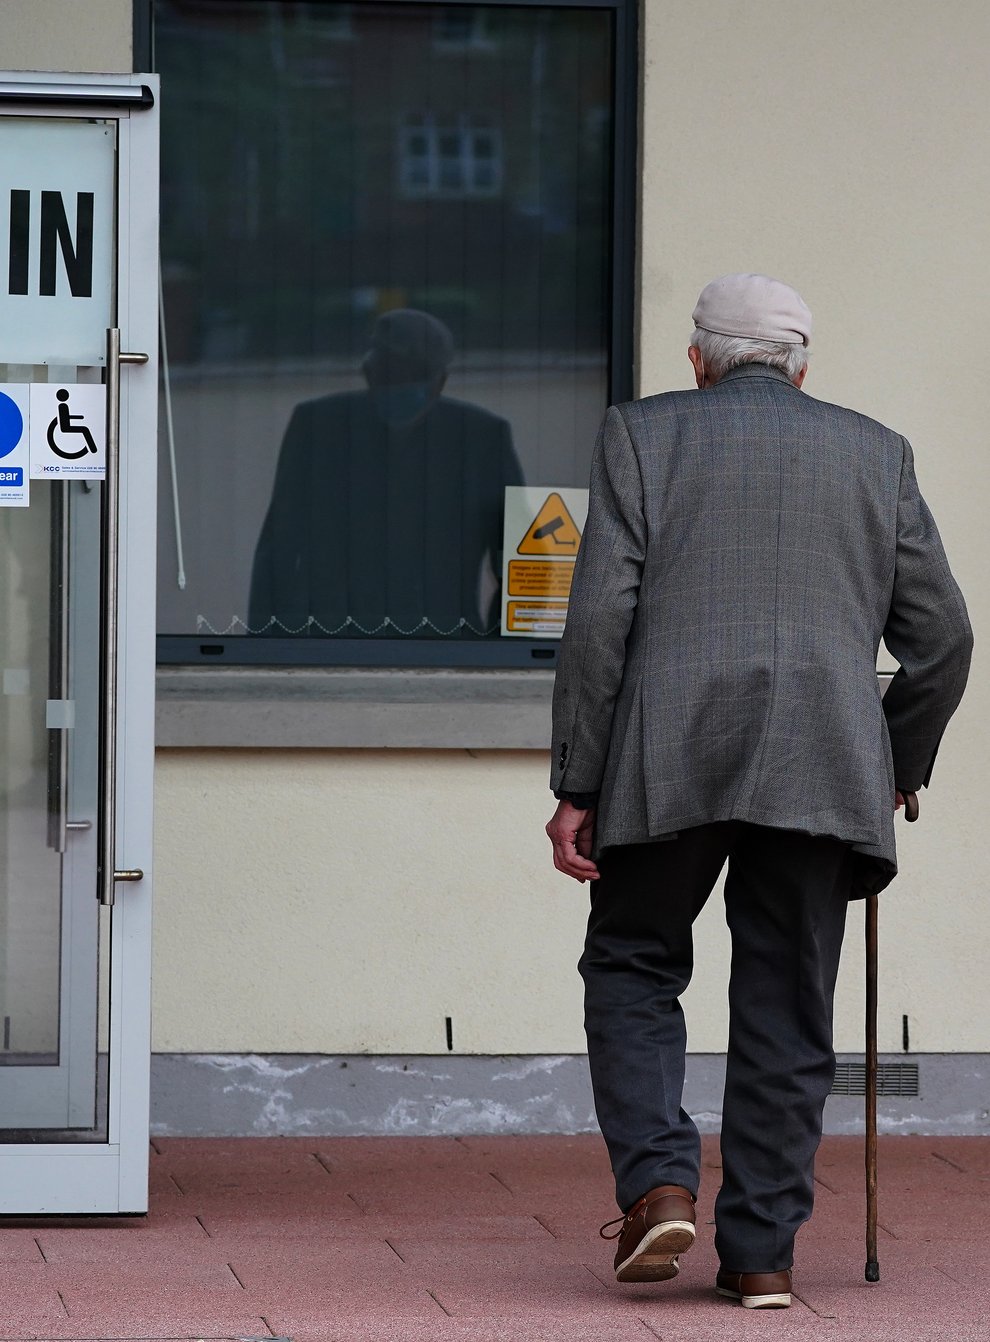 Polling stations closed across Northern Ireland at 10pm (Brian Lawless/PA)